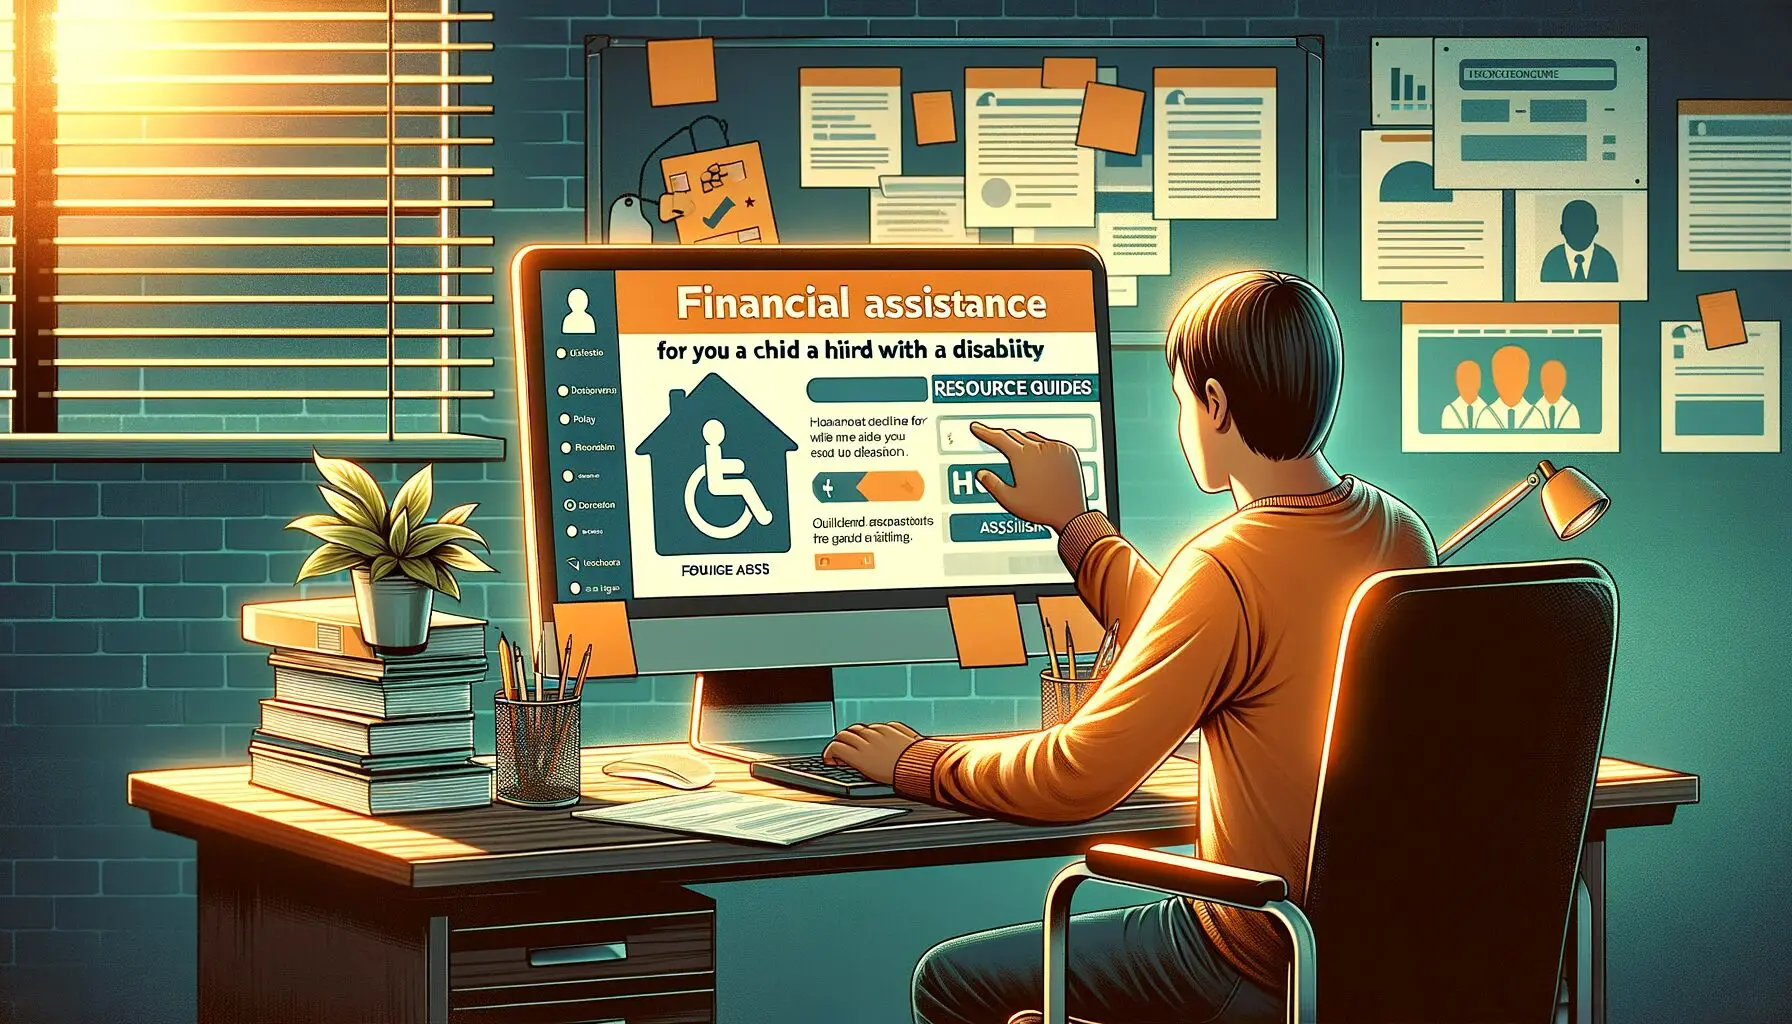 A digital illustration showing how to get financial assistance for a child with a disability.